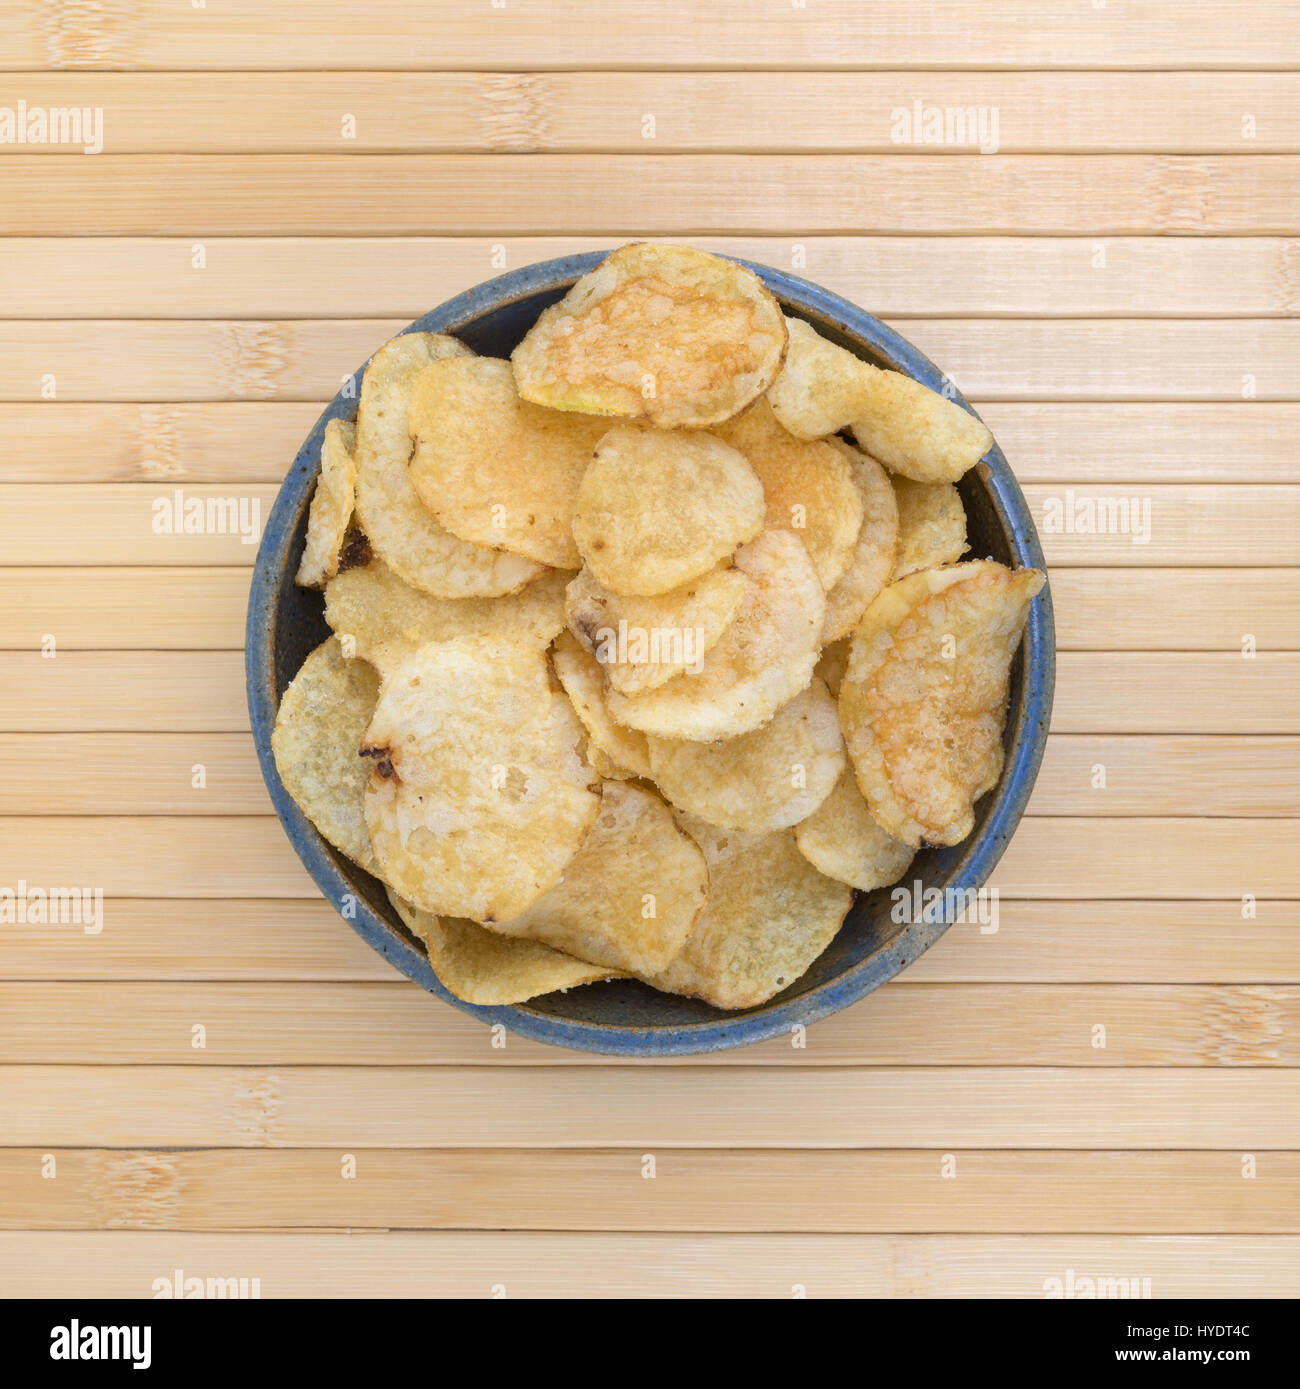 Top view of an old stoneware bowl filled with salt and vinegar flavored potato chips on wood place mat. Stock Photo